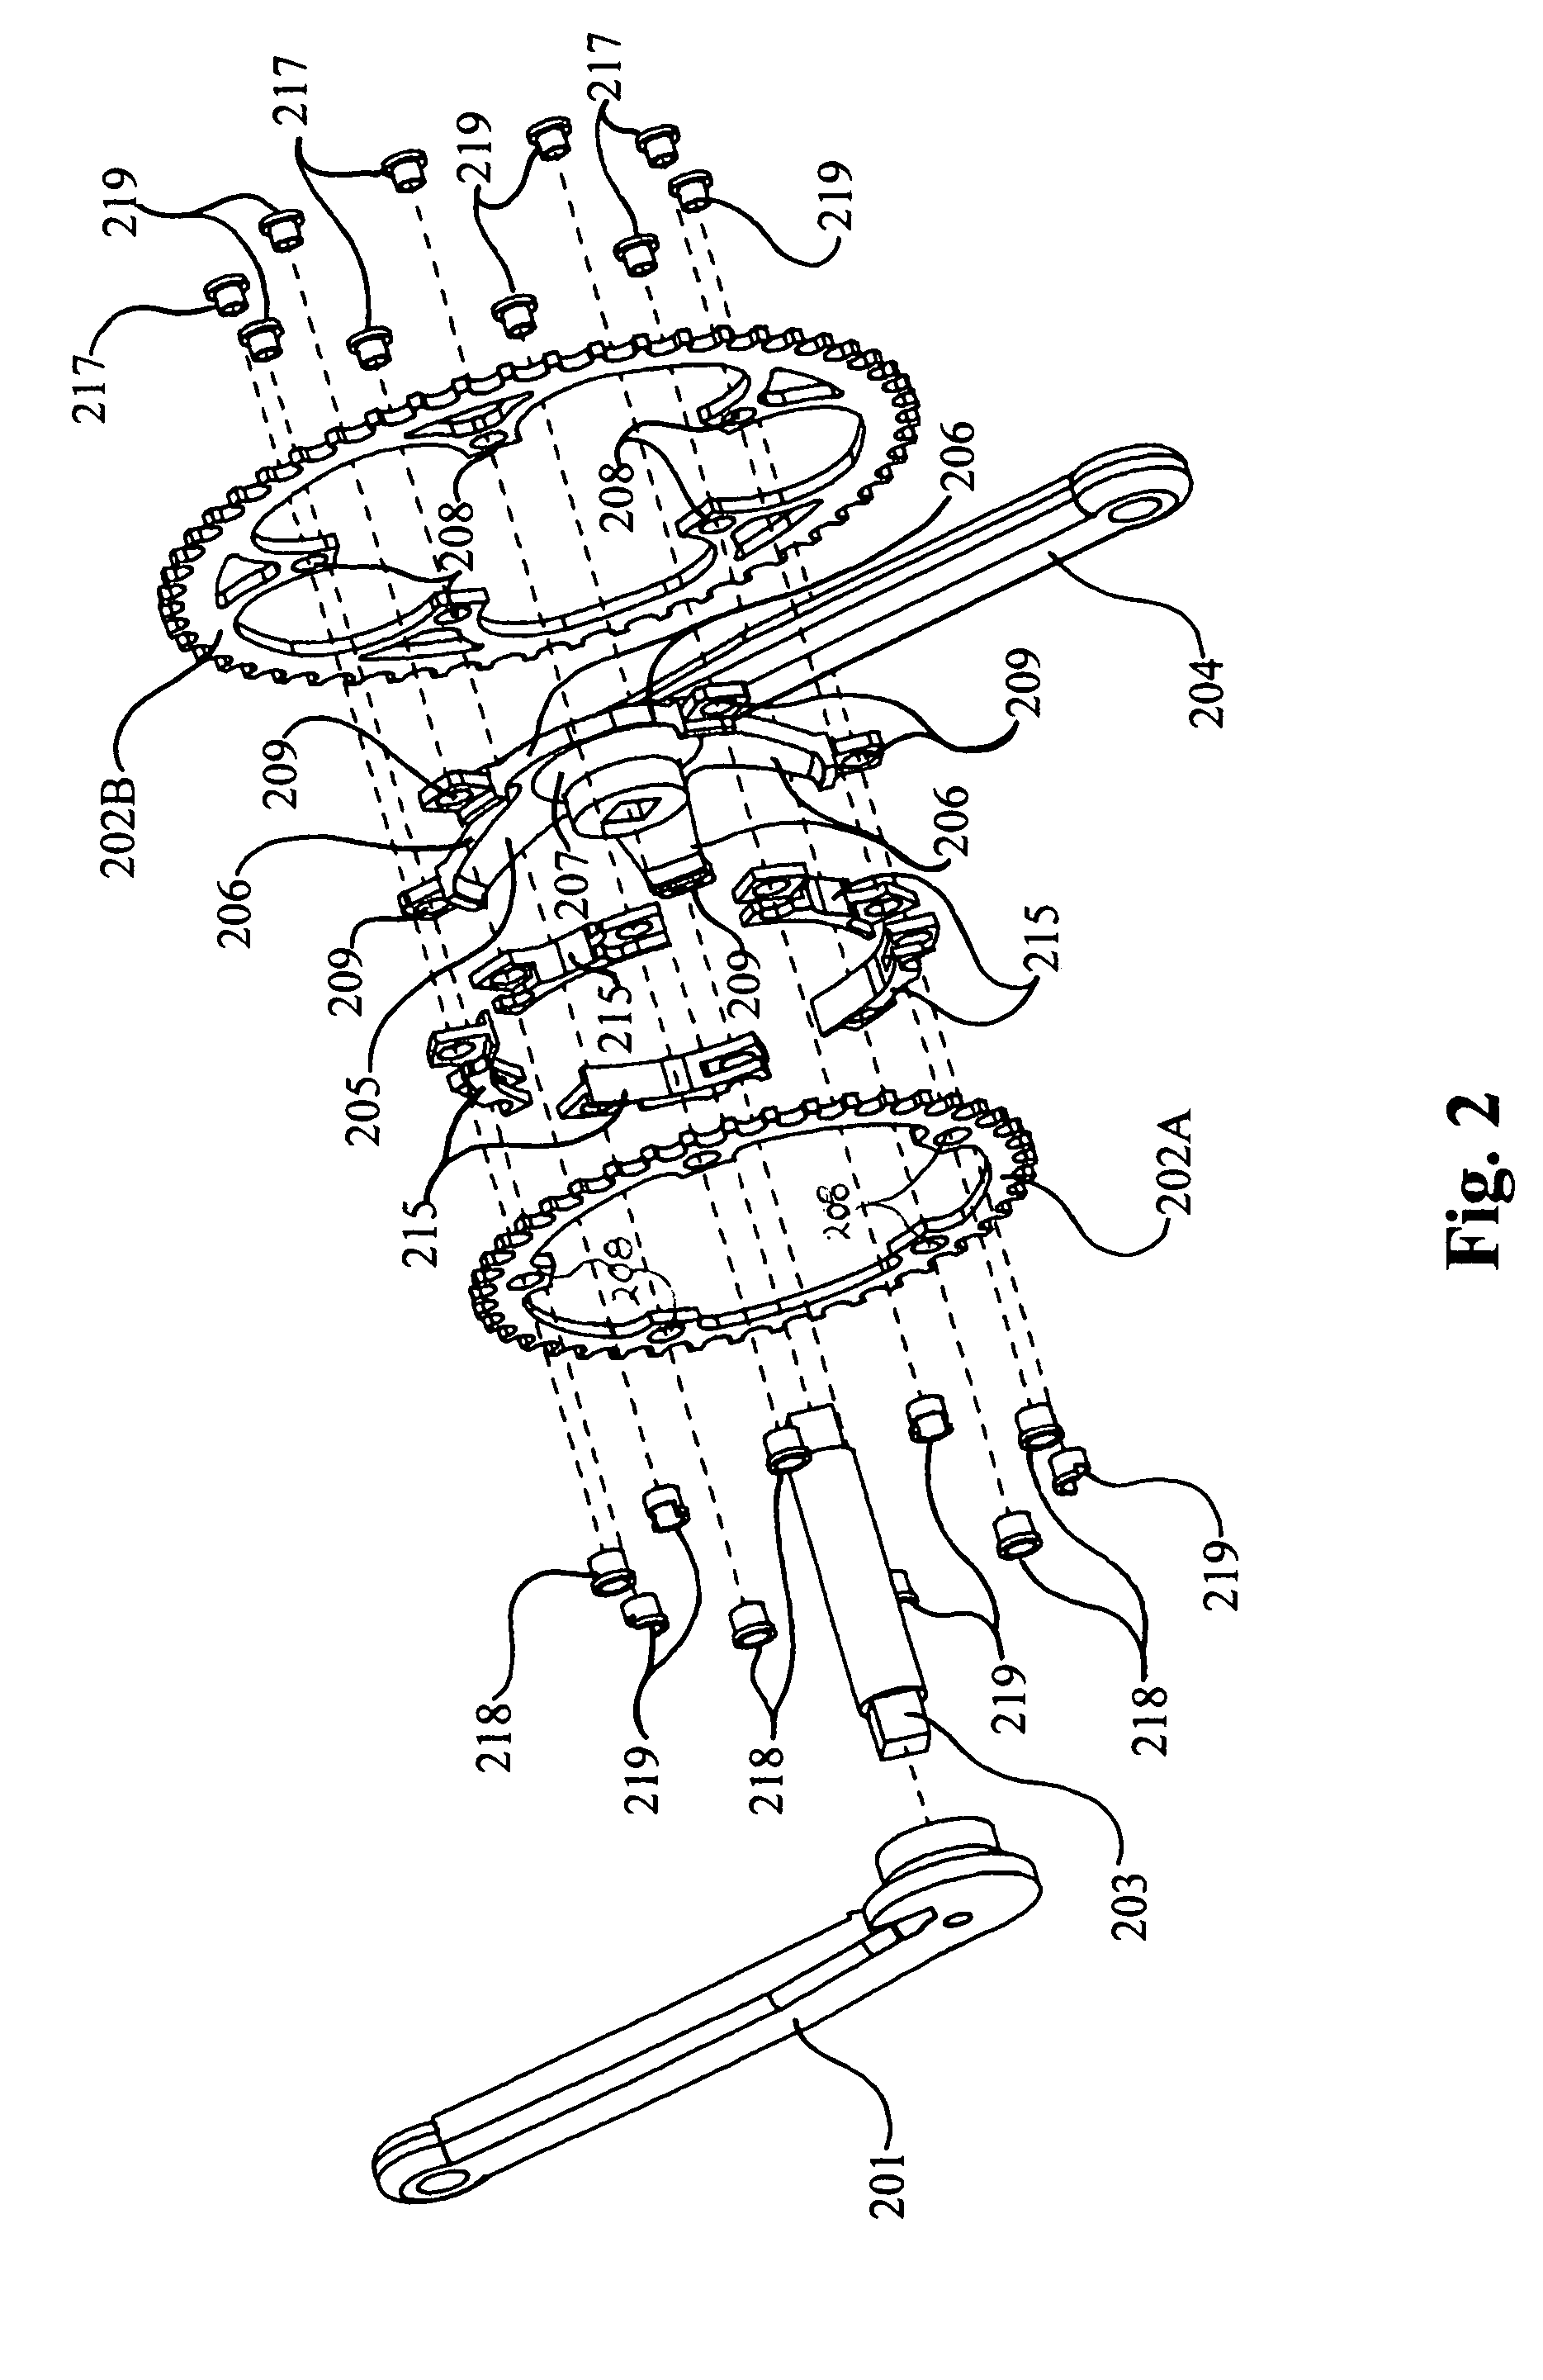 Load measurement apparatus and methods utilizing torque sensitive link for pedal powered devices